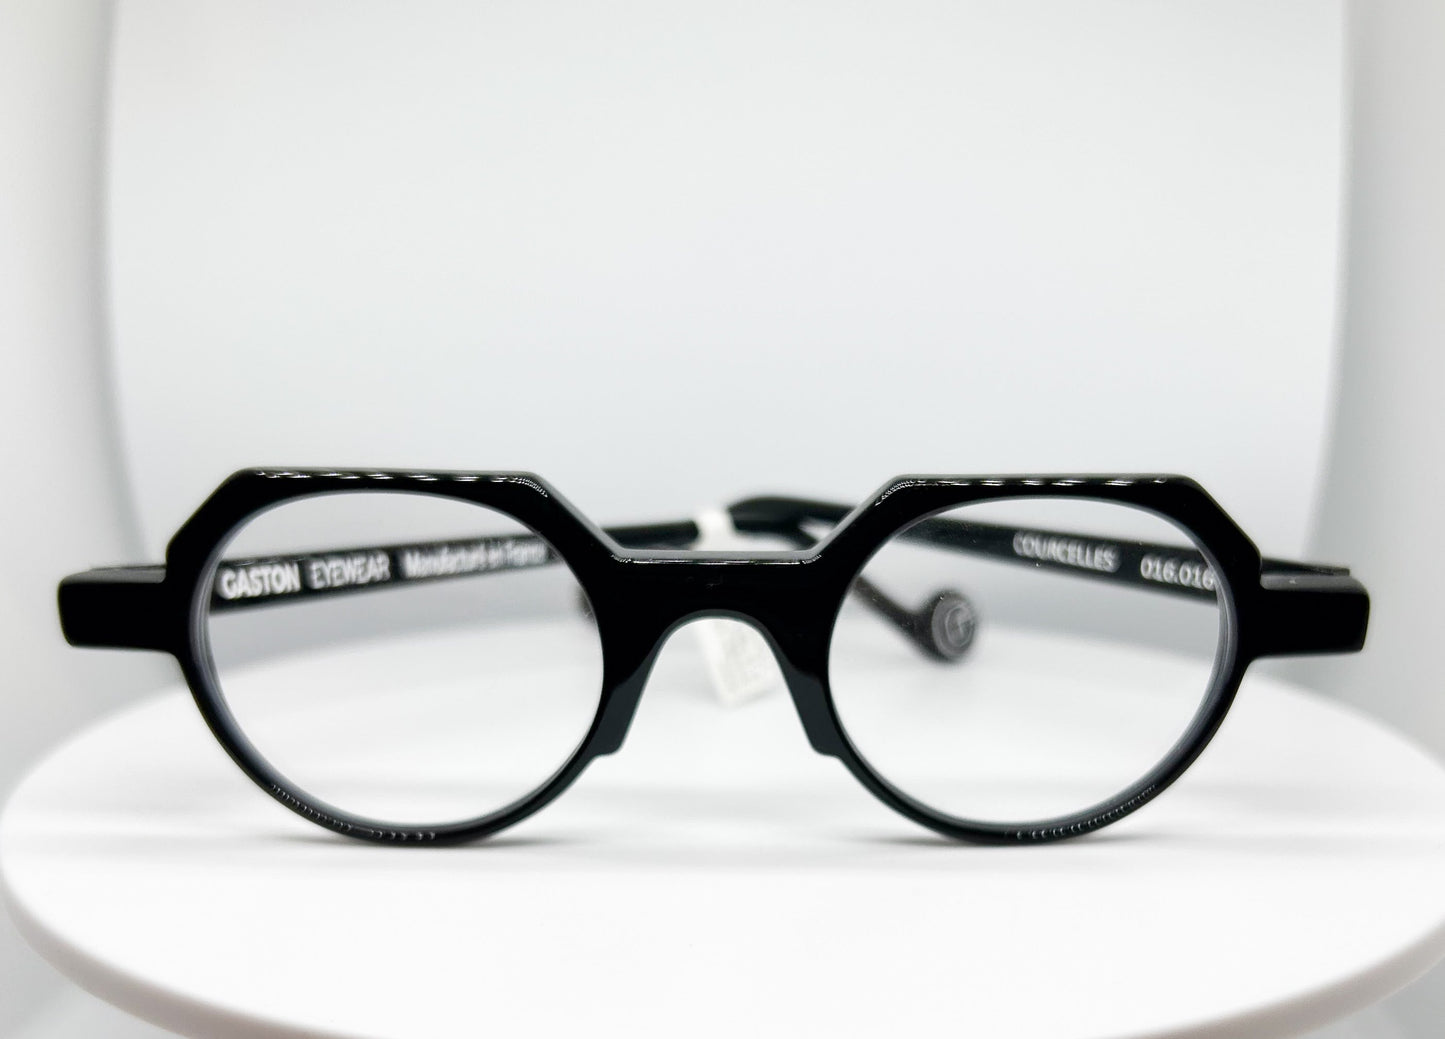 Buy Gaston Eyewear - Courcelles, a  Black; Acetate Optical Frame with a Round with Flat Top shape. An Authorized Dealer, Adair Eyewear has a 40+ Years History of Customer Service Excellence